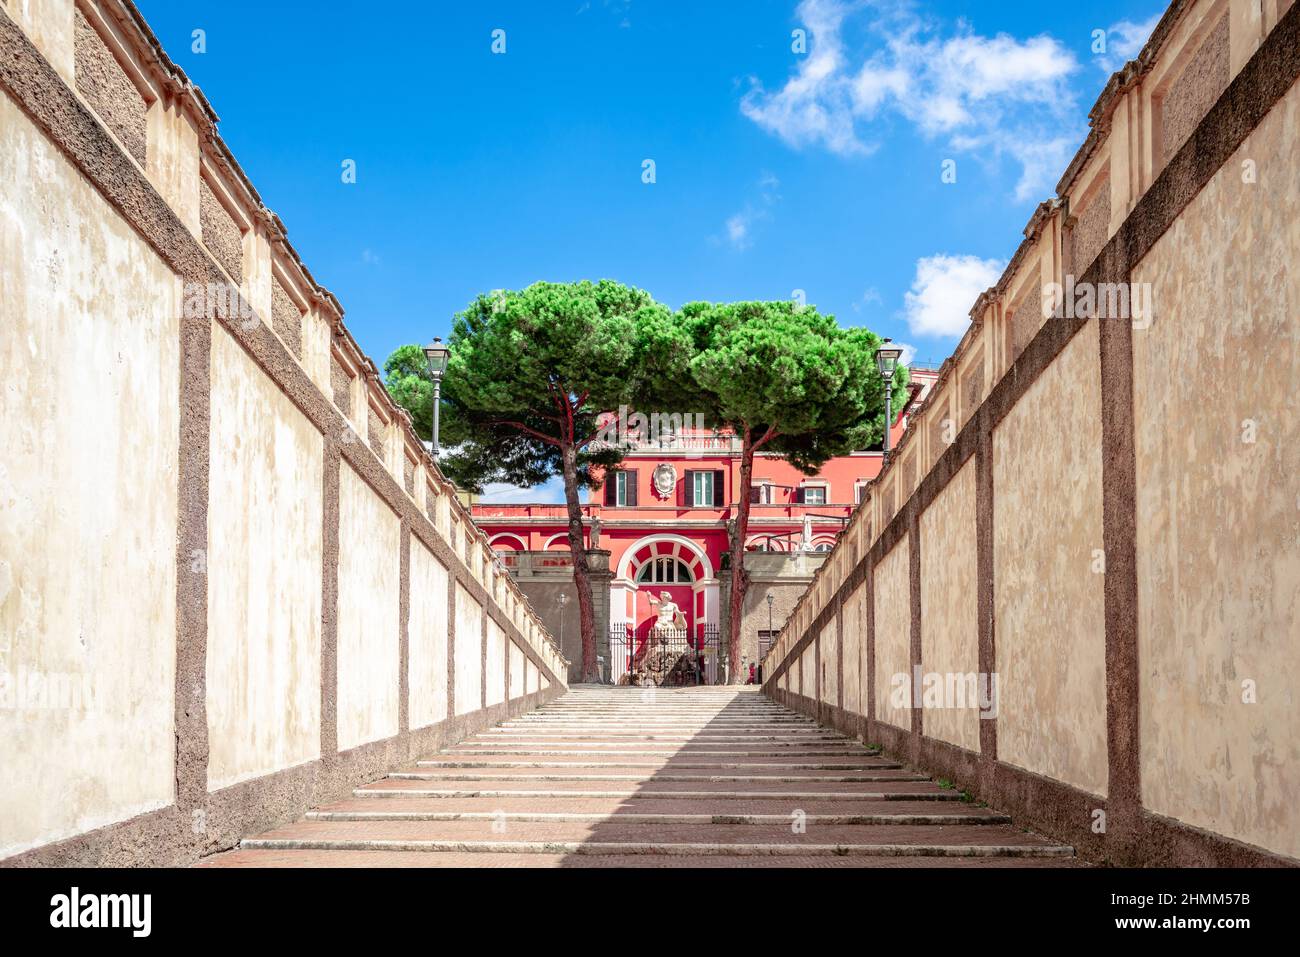 The rear external stair of the Palazzo Barberini that leads to the secret garden. It is a 17th-century palace in Rione Trevi, Rome, Italy. Stock Photo